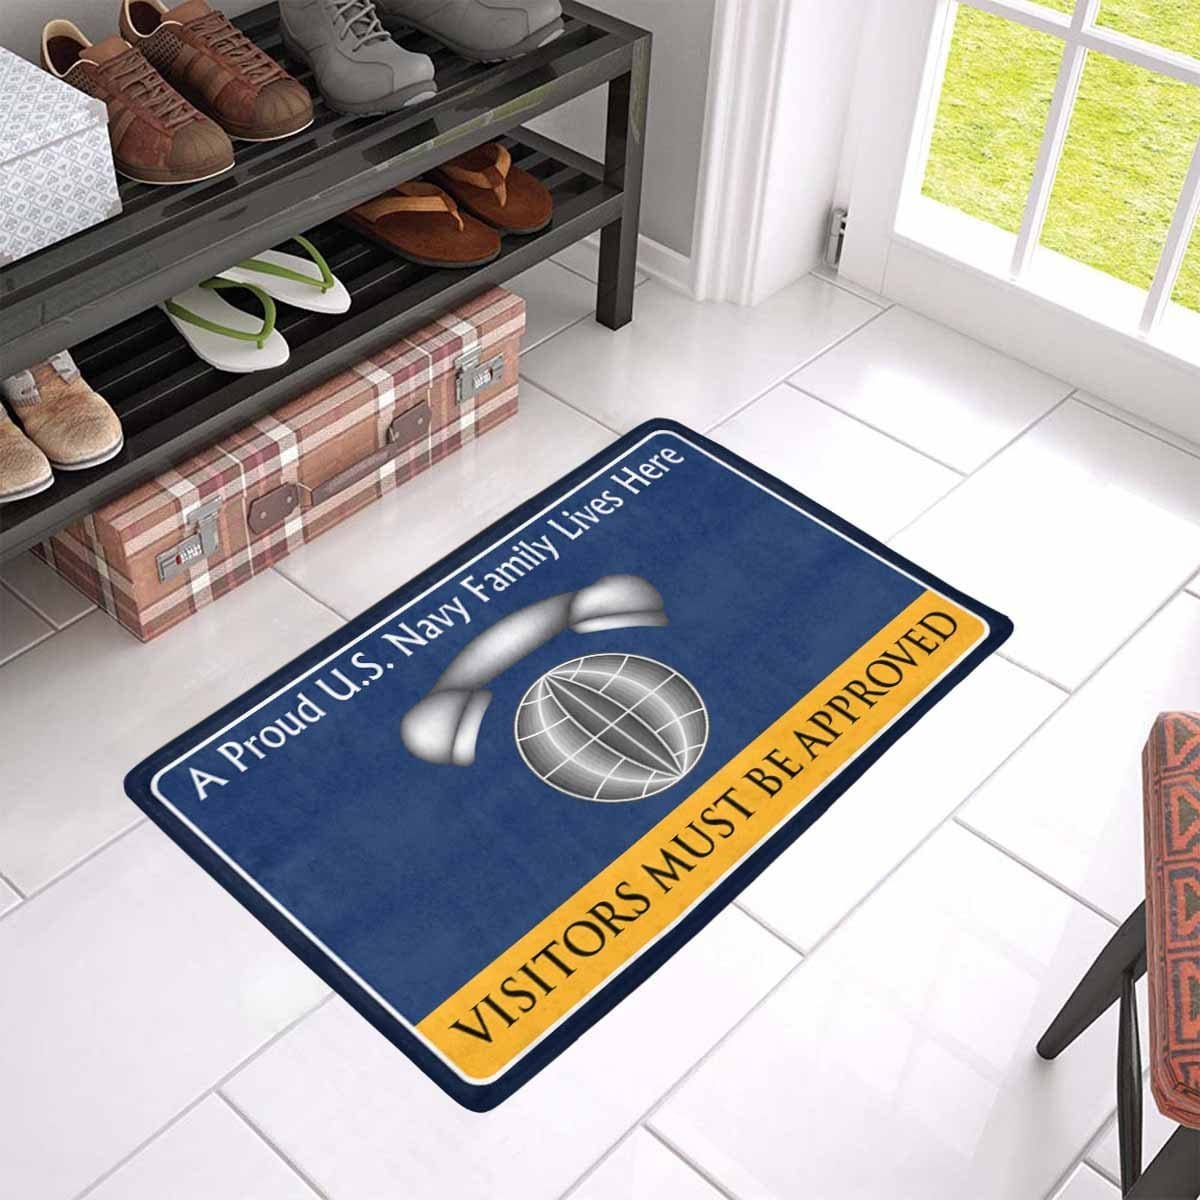 Navy Interior Communications Electrician Navy IC Family Doormat - Visitors must be approved (23,6 inches x 15,7 inches)-Doormat-Navy-Rate-Veterans Nation